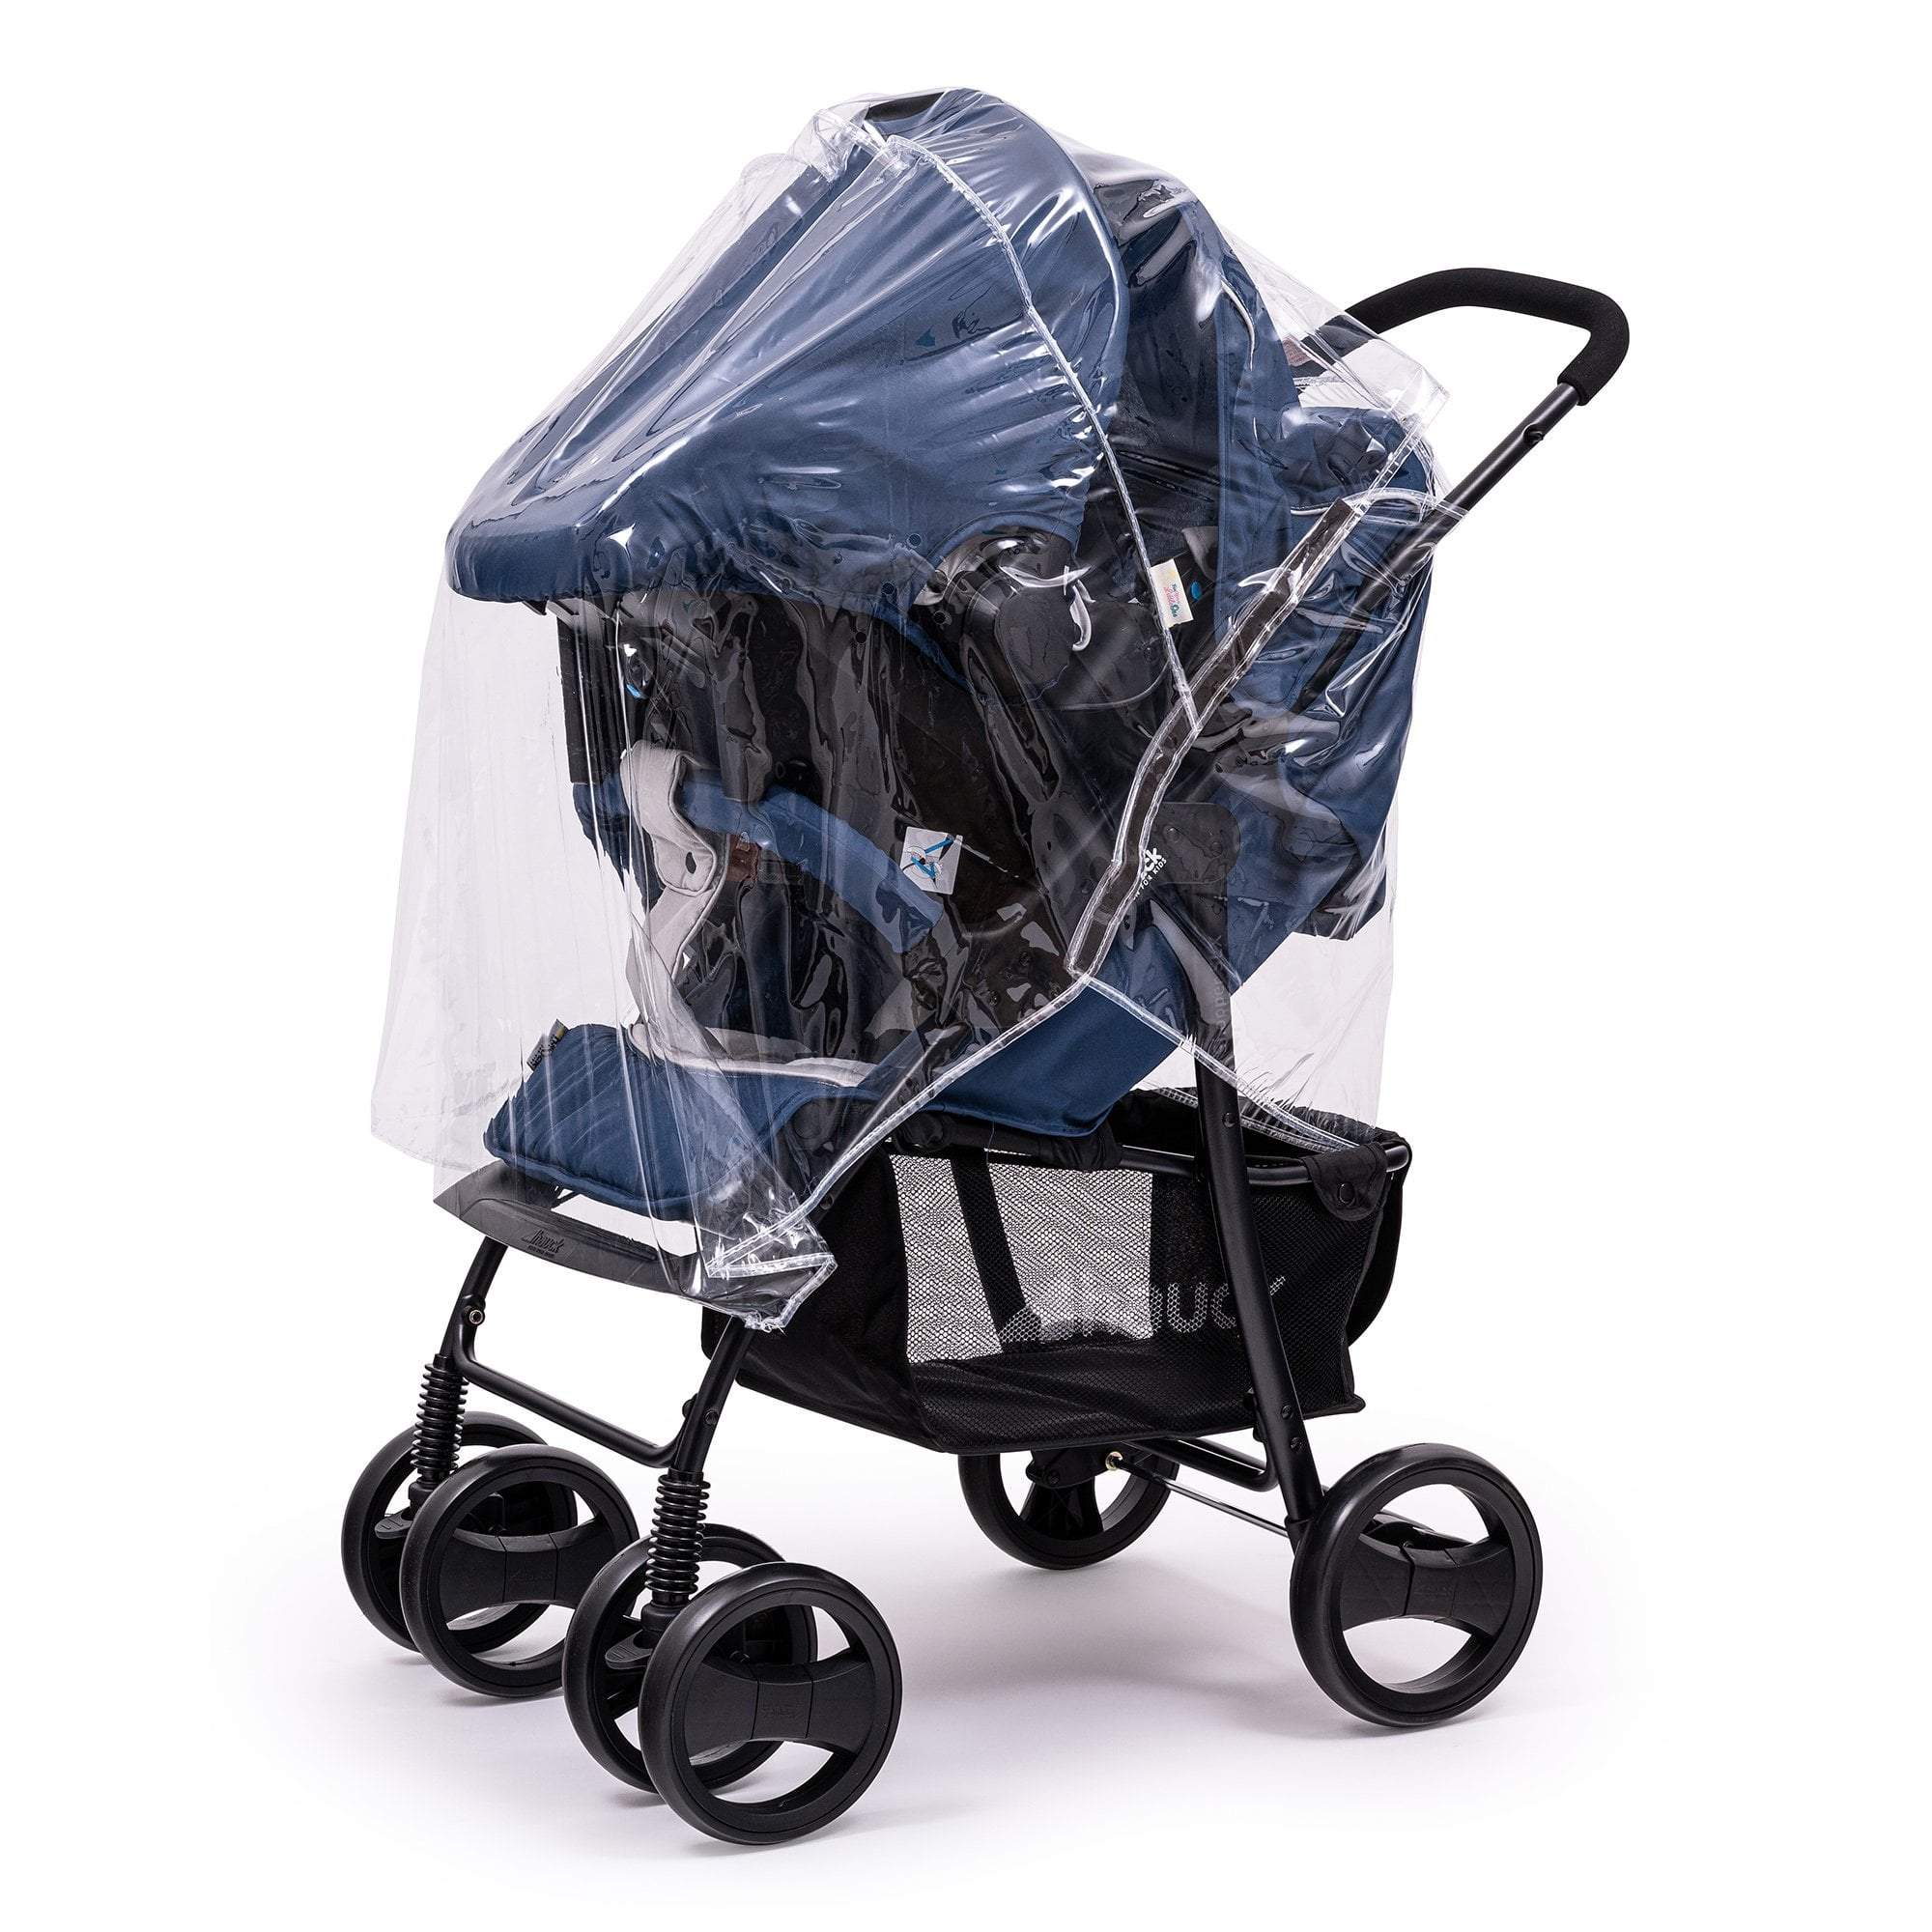 Travel System Raincover Compatible with Mima - Fits All Models - For Your Little One